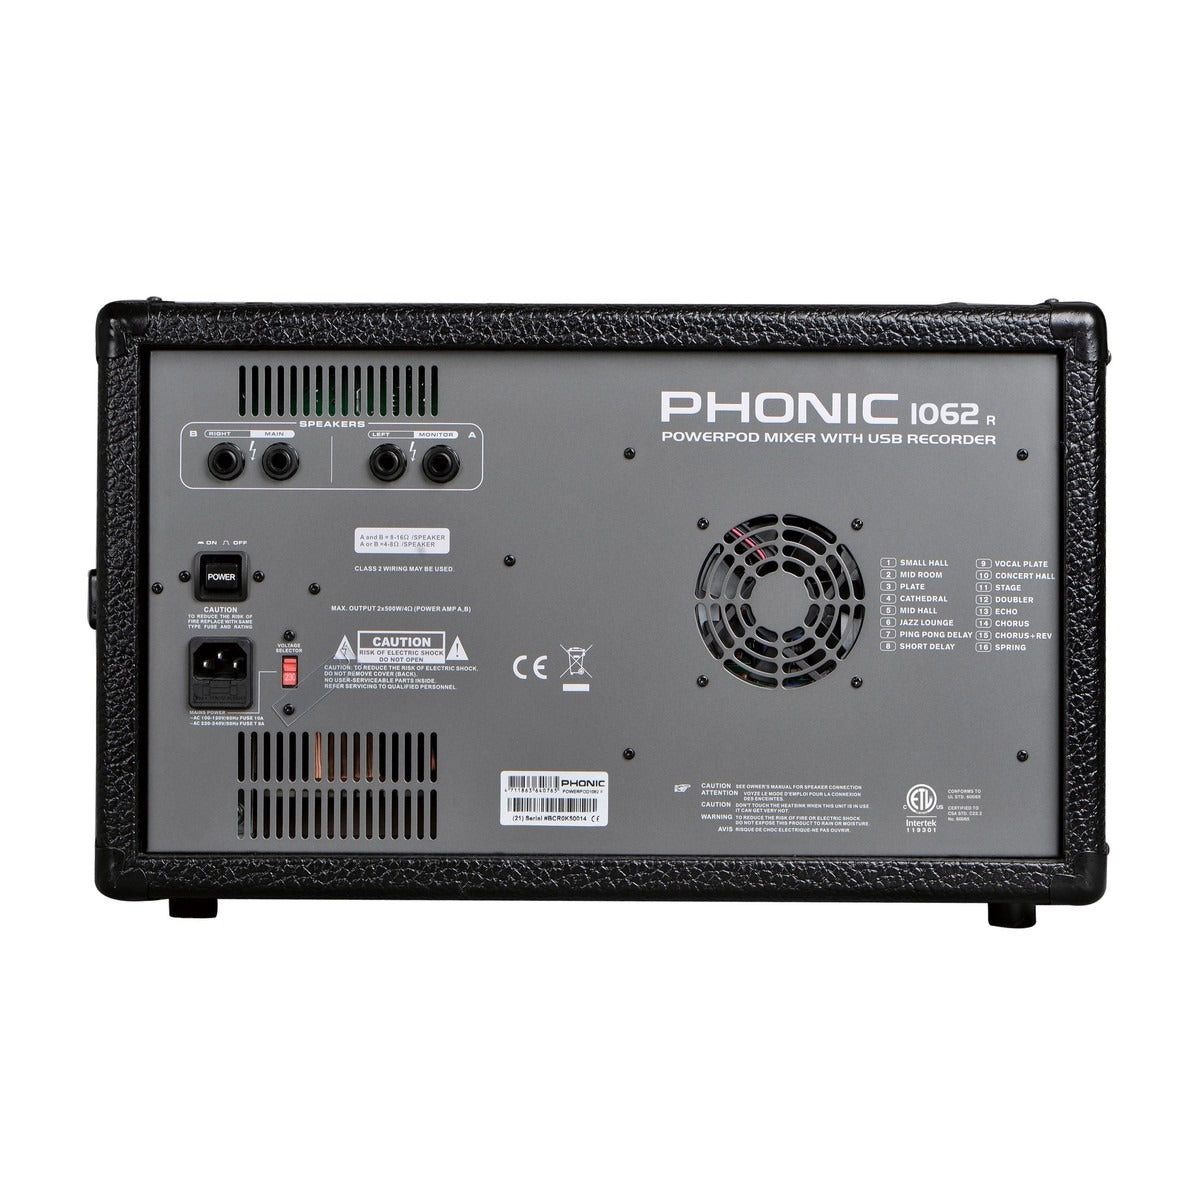 Phonic POWERPOD 1062R 600W 10-Channel Powered Mixer with DFX, USB Recorder, Dual 8-Band Graphic Equalizers, Two Super Hi-Z Inputs, Two Built-in Limiters, and Trim Control for Record Level Matching